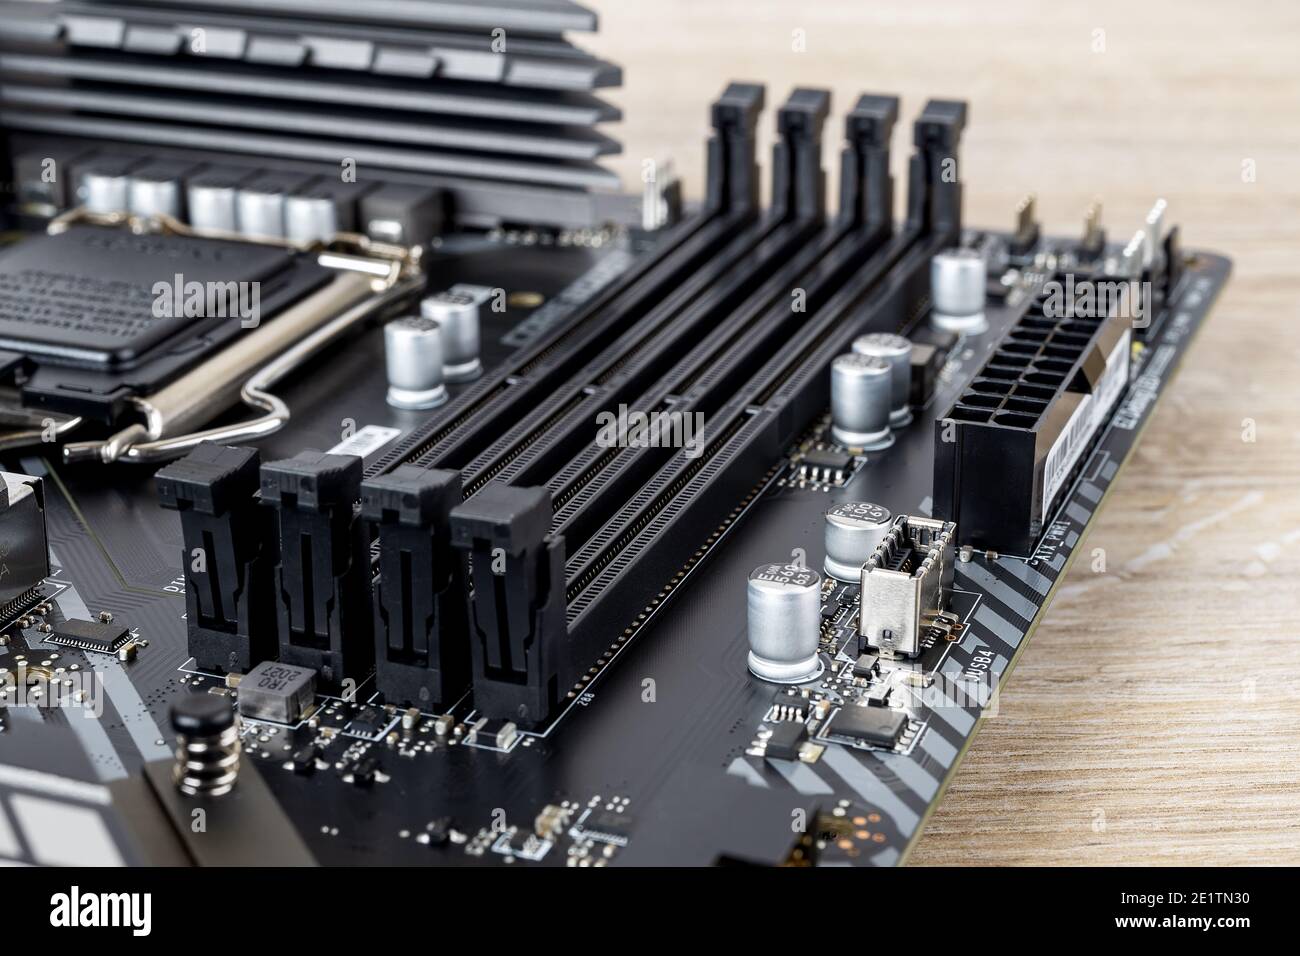 Forge stå pisk Four slots for ddr4 ram memory modules on a modern black pc motherboard.  Computer mainboard circuit components. Desktop hardware close-up Stock  Photo - Alamy